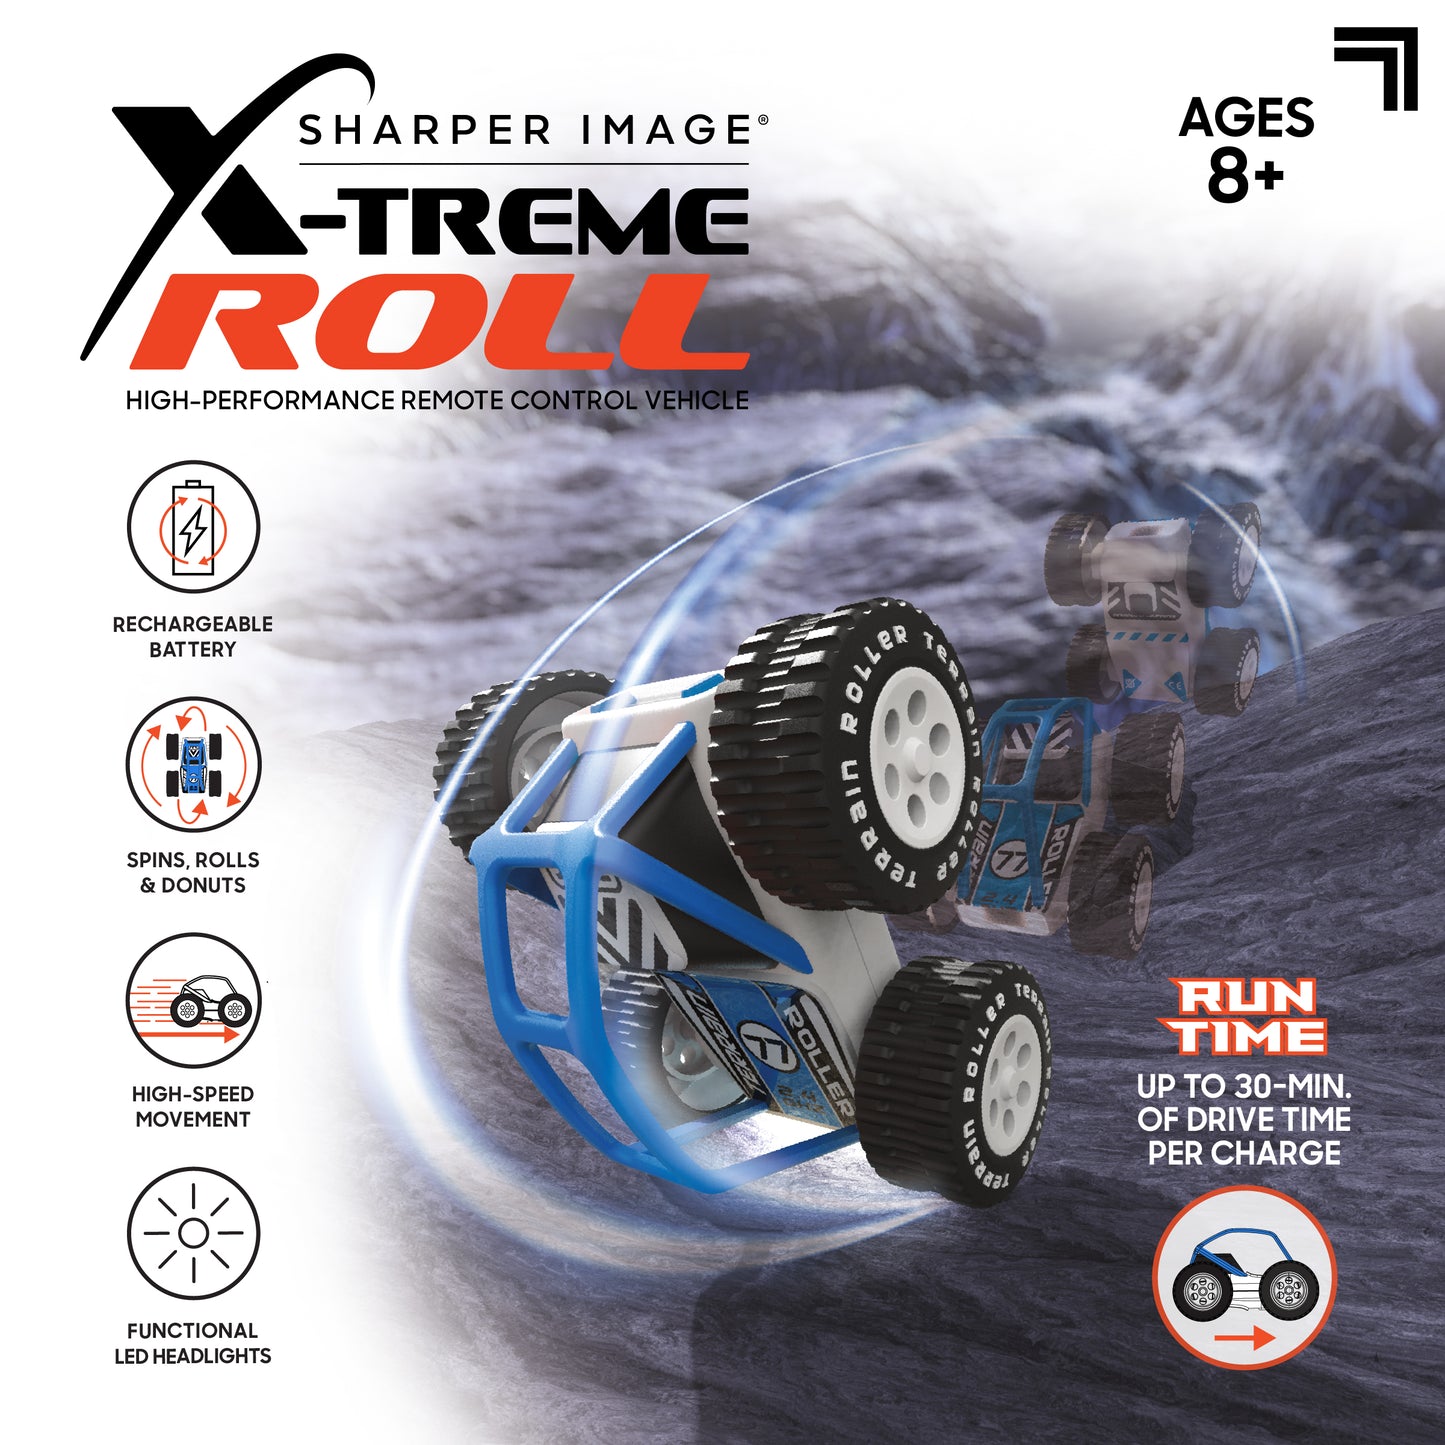 Sharper Image® Toy RC x-Treme Roll High Performance Remote Control Vehicle with 360 Stunts, Spin and Flips, All-Terrain, Age 6+, Blue